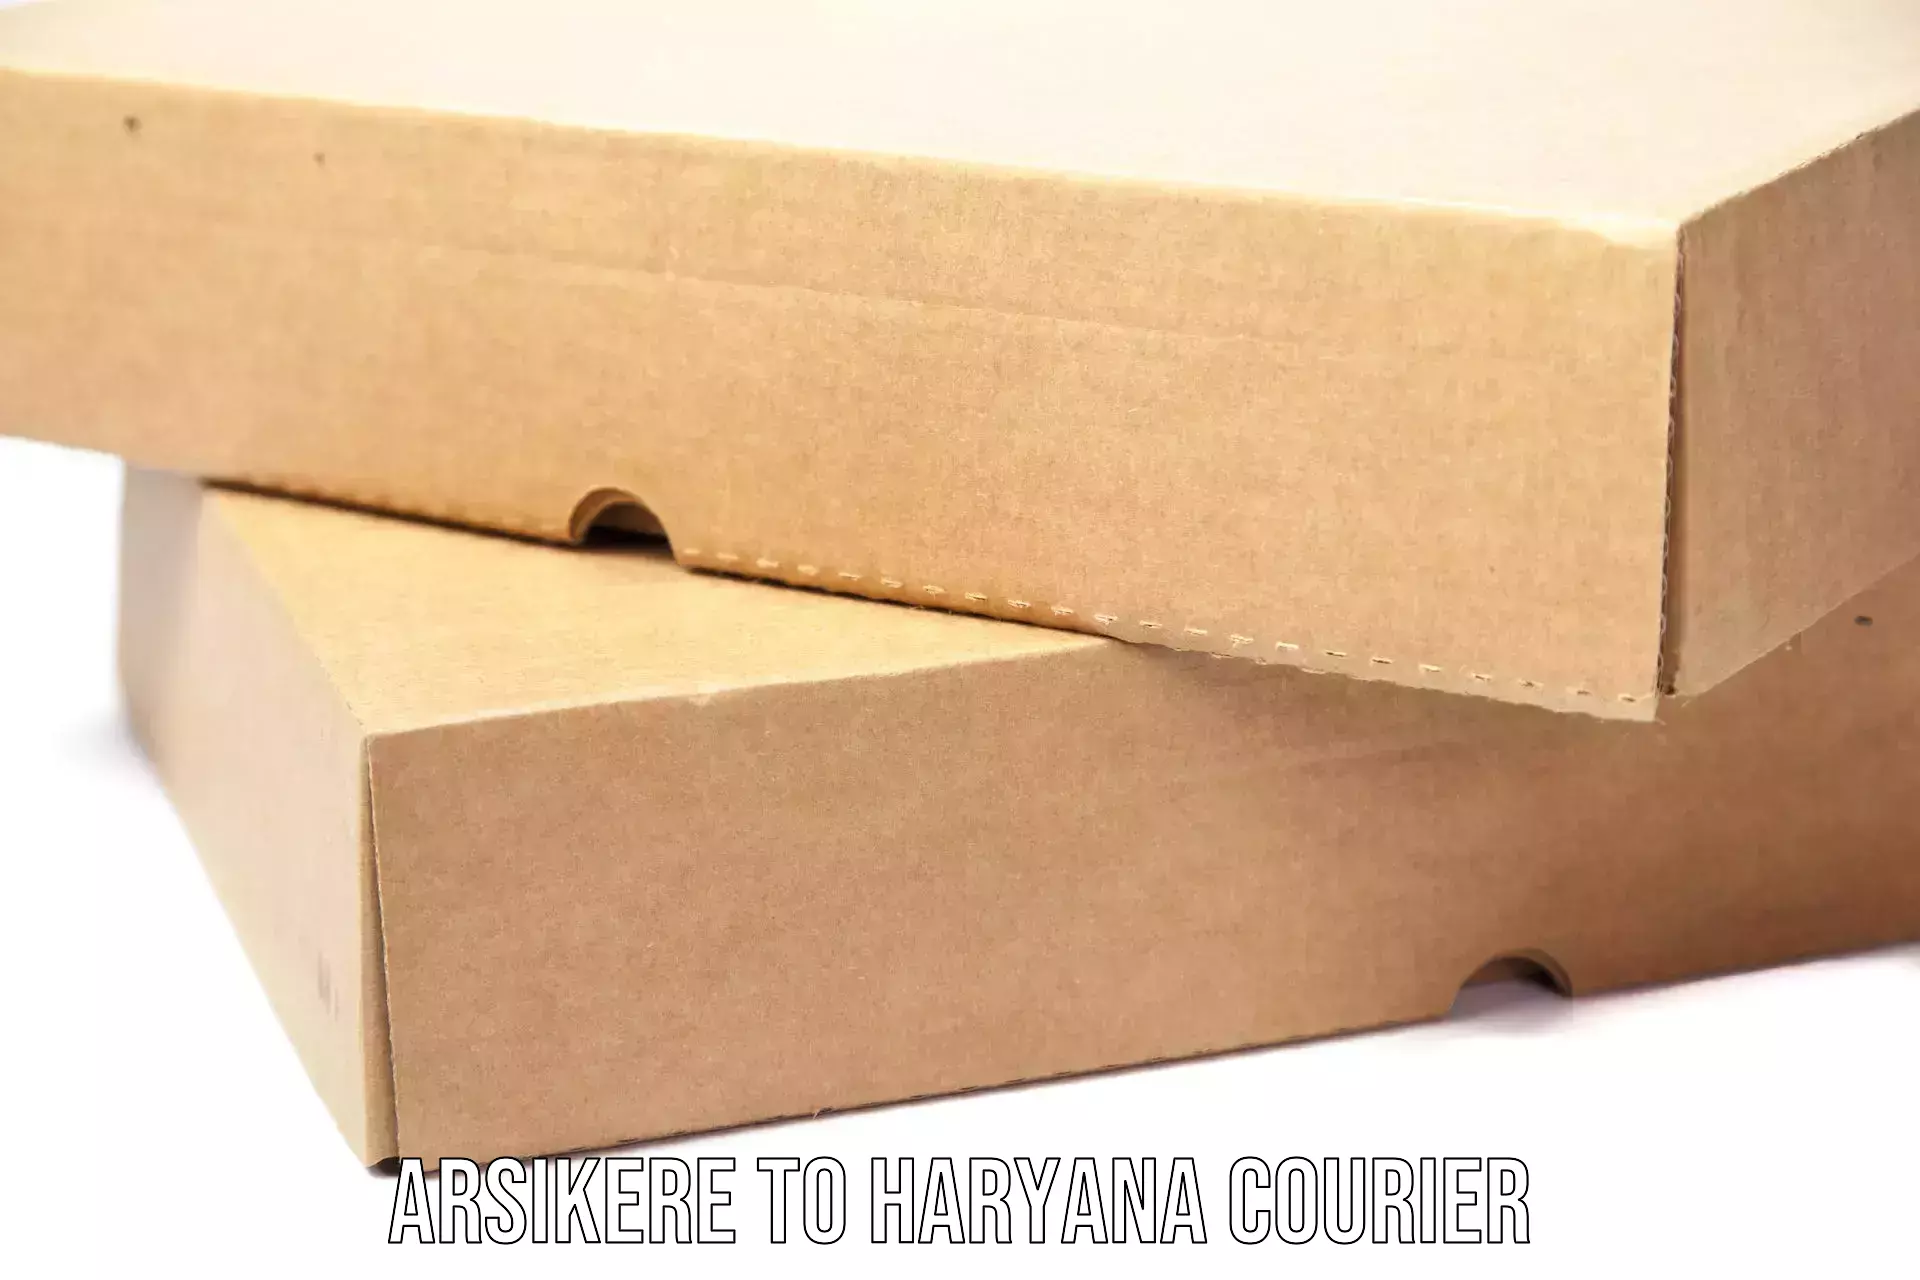 Subscription-based courier Arsikere to Haryana